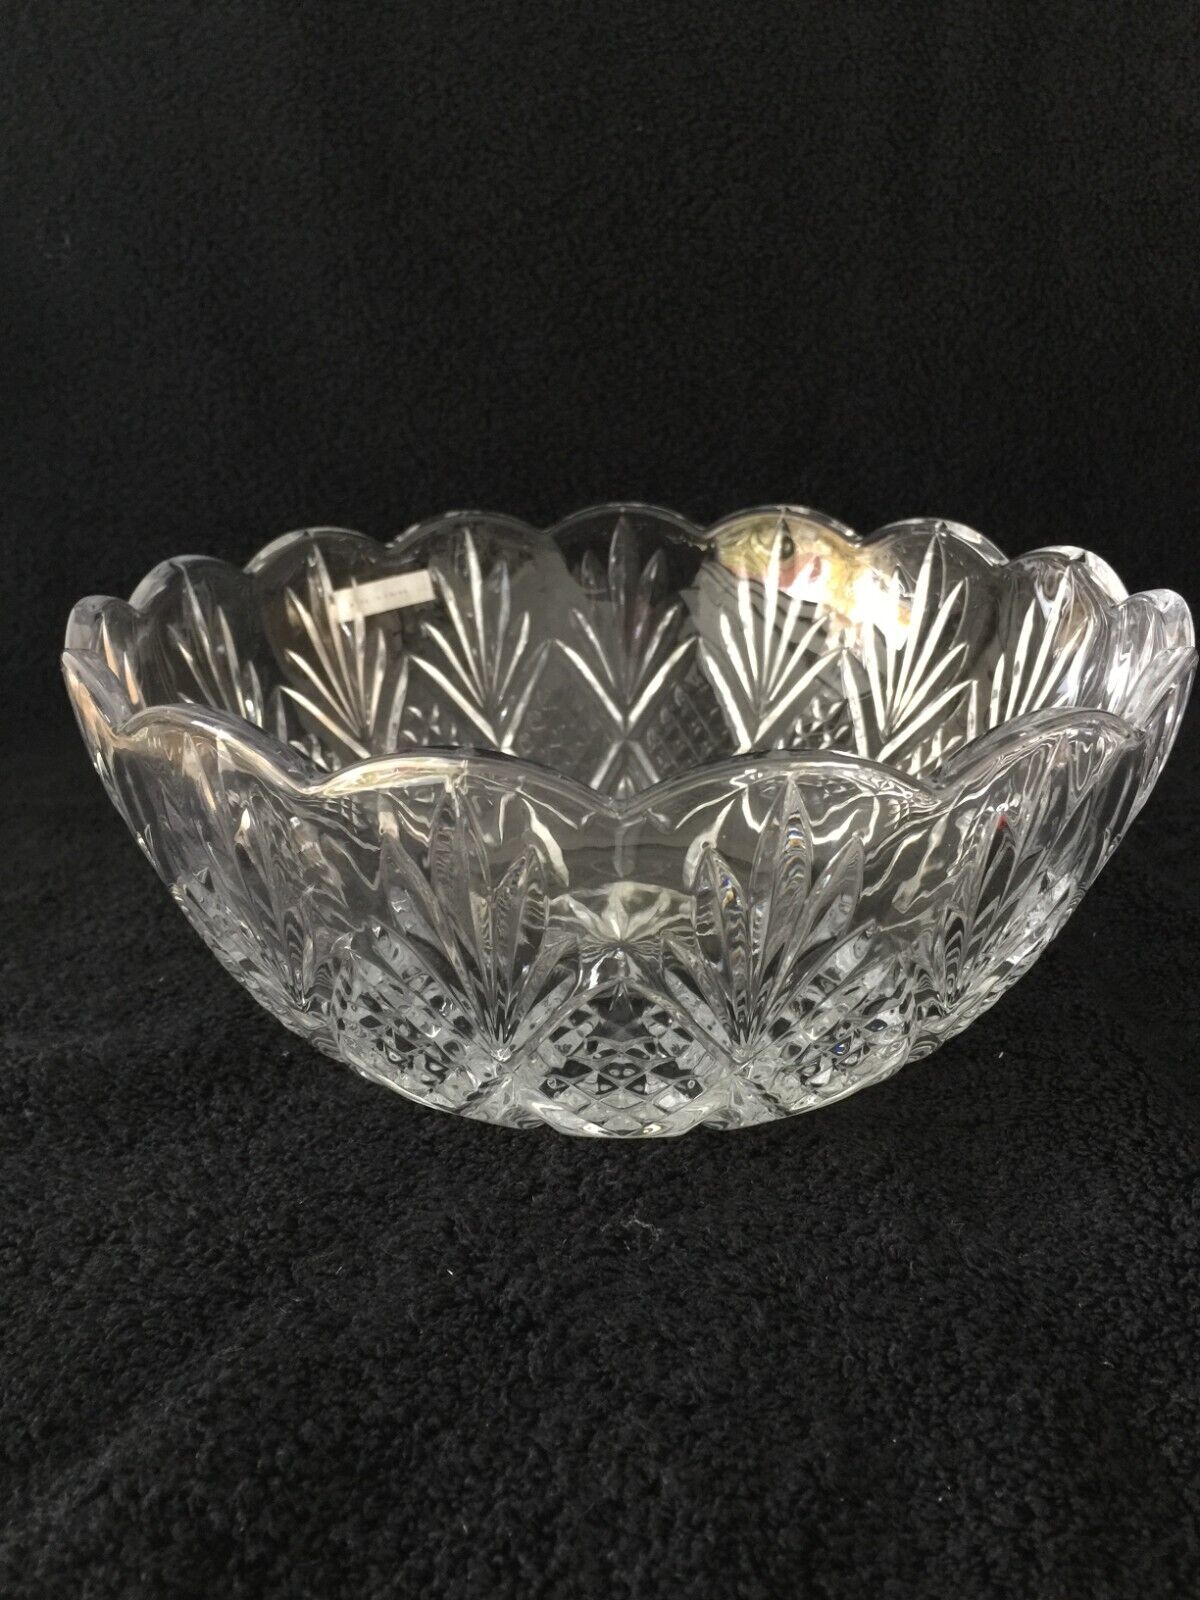 New Dublin Vintage Crystal Bowl With Scalloped Edges